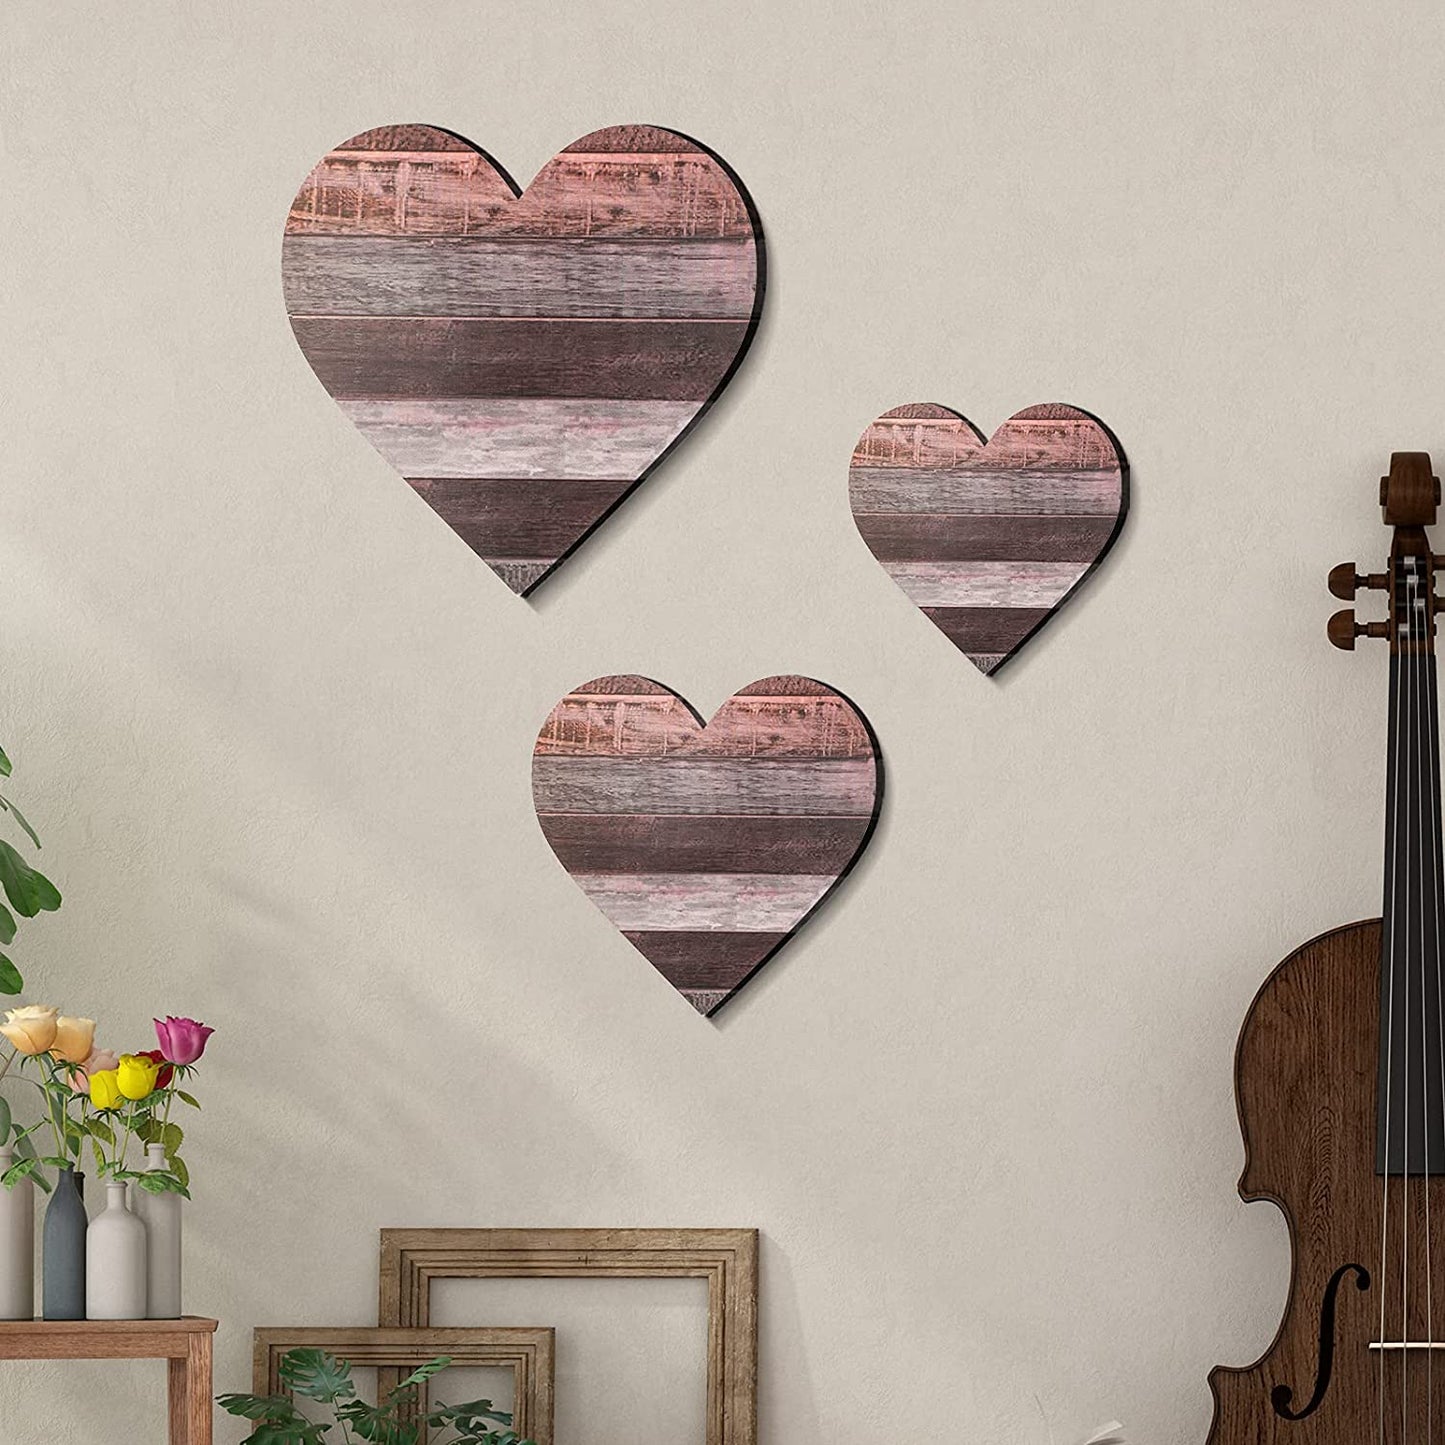 3 Pcs Heart Shaped Wood Sign Buffalo Plaid Decor for Kitchen Bedroom Bathroom Living Room Wooden Heart Wall Sign Rustic Hanging Plaque Christmas Decor, 3 Sizes (Red Brown Wood Grain)